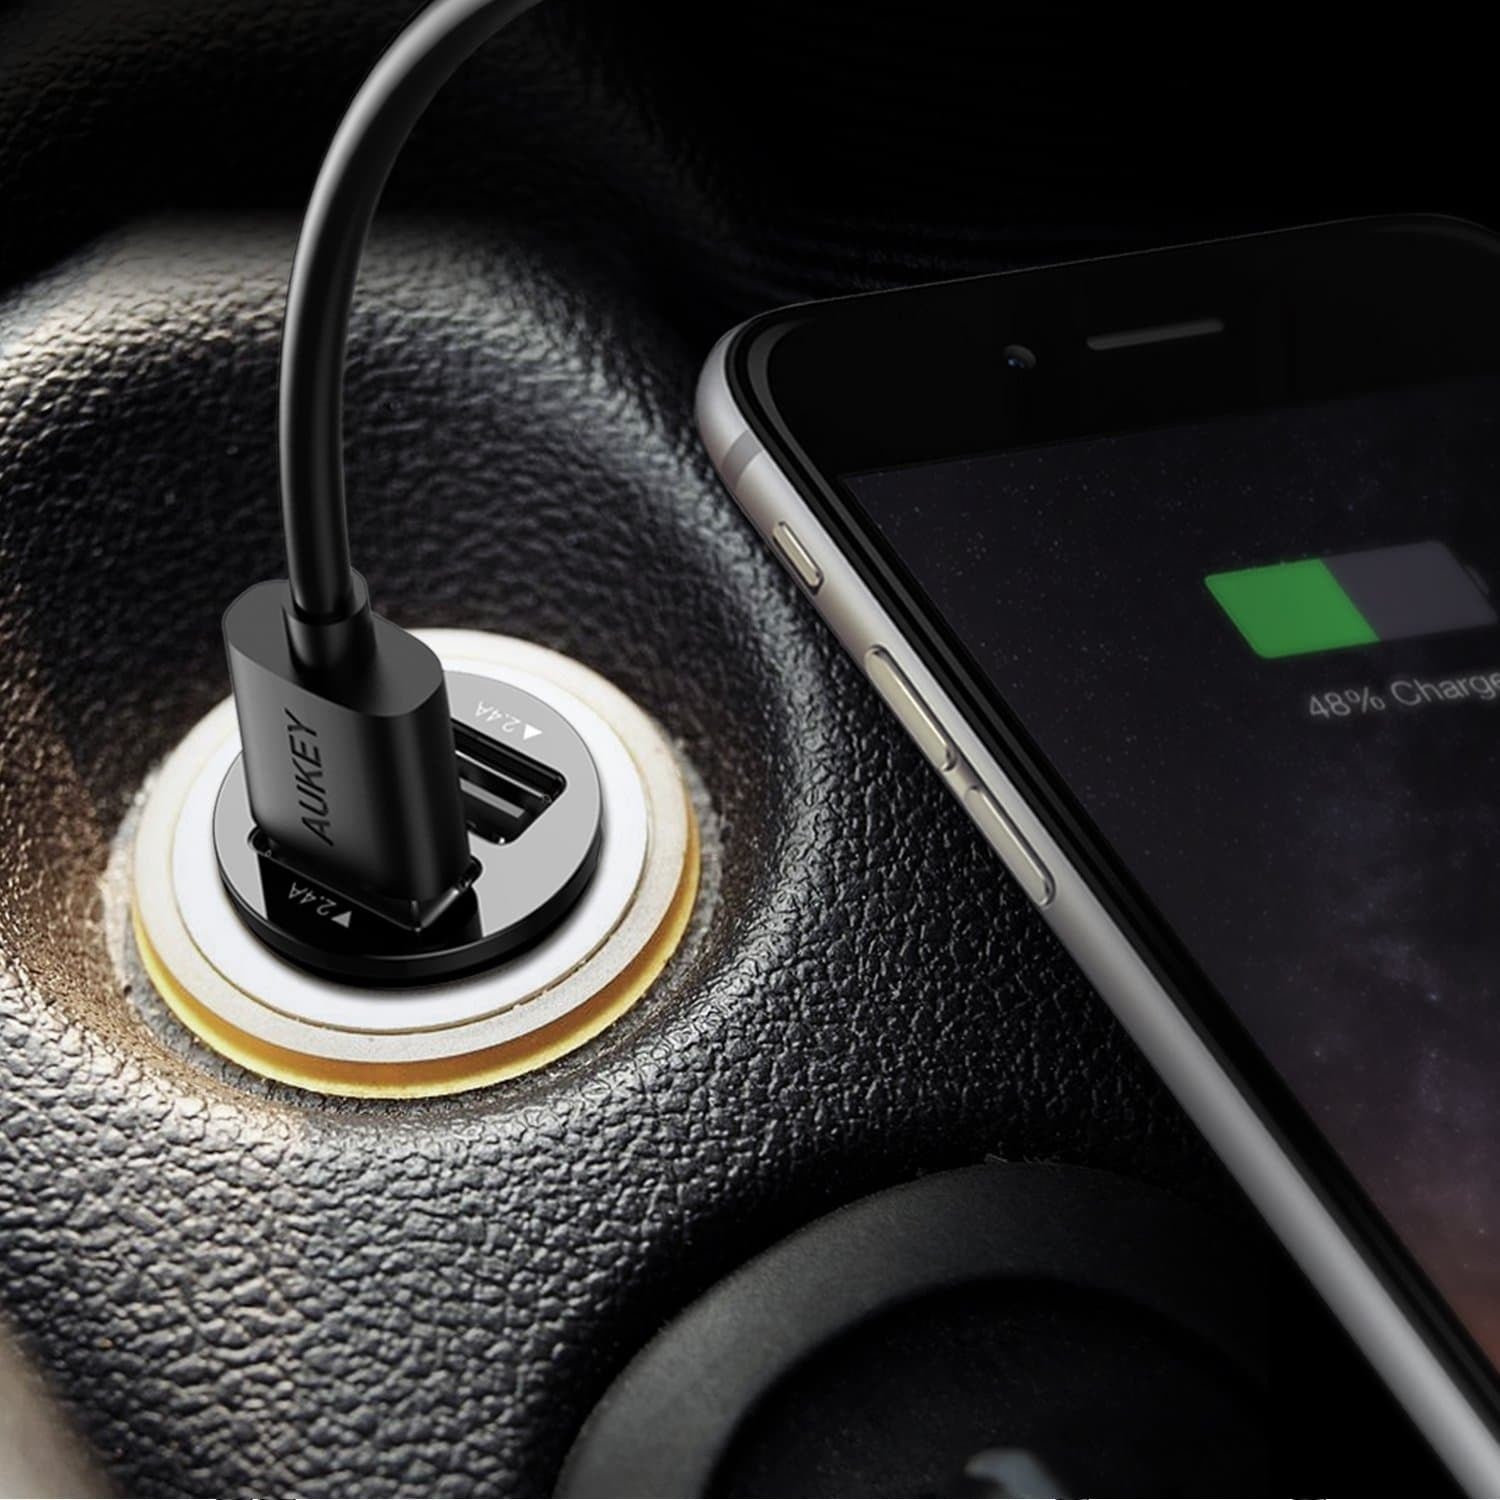 AUKEY CC-S1 Universal True AiPOWER 24W 4.8A Dual Port Car Charger - Aukey Malaysia Official Store